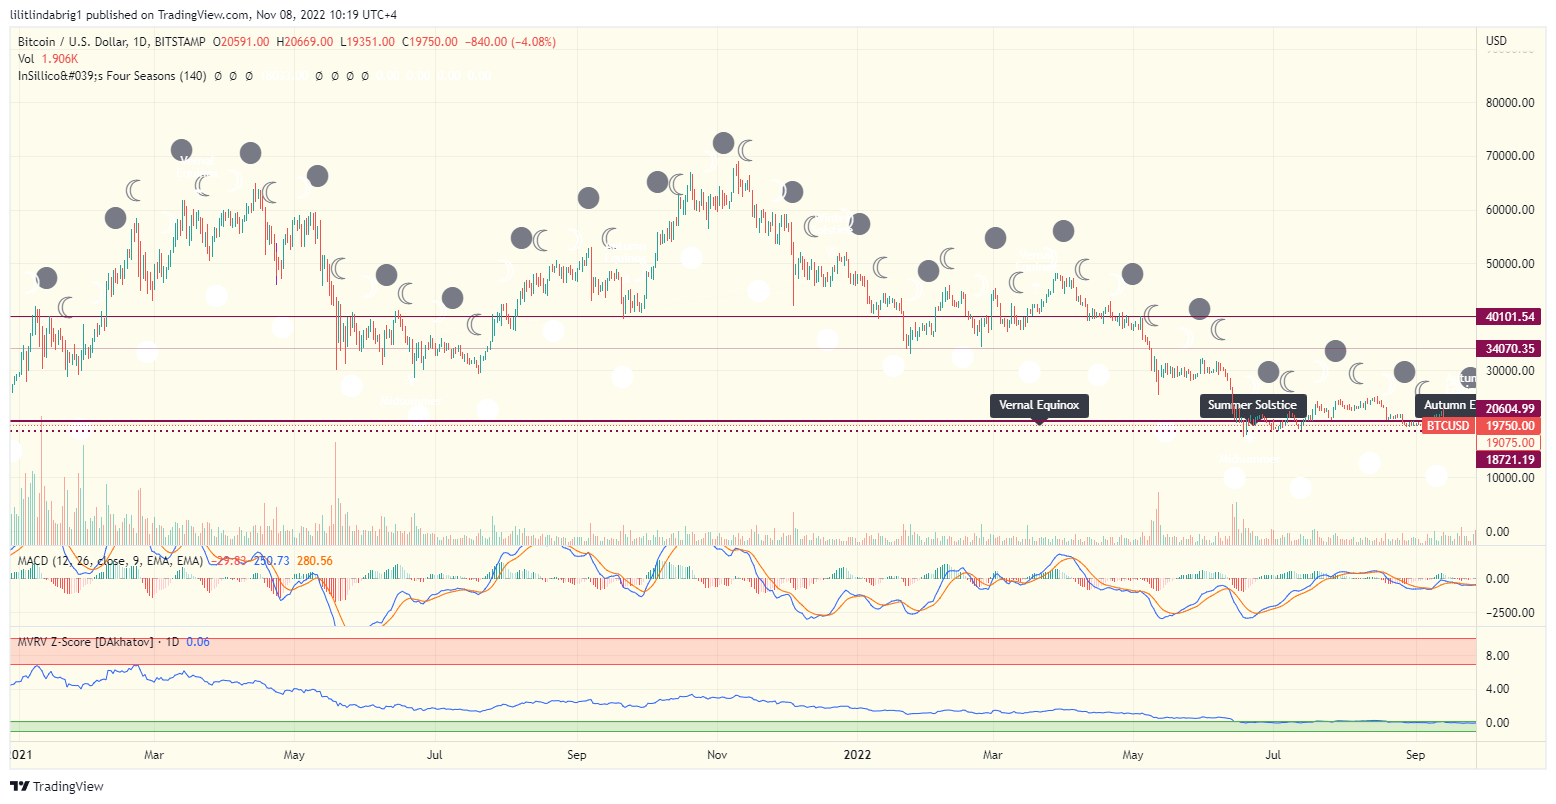 Bitcoin (BTC) daily price chart, featuring moon patterns.